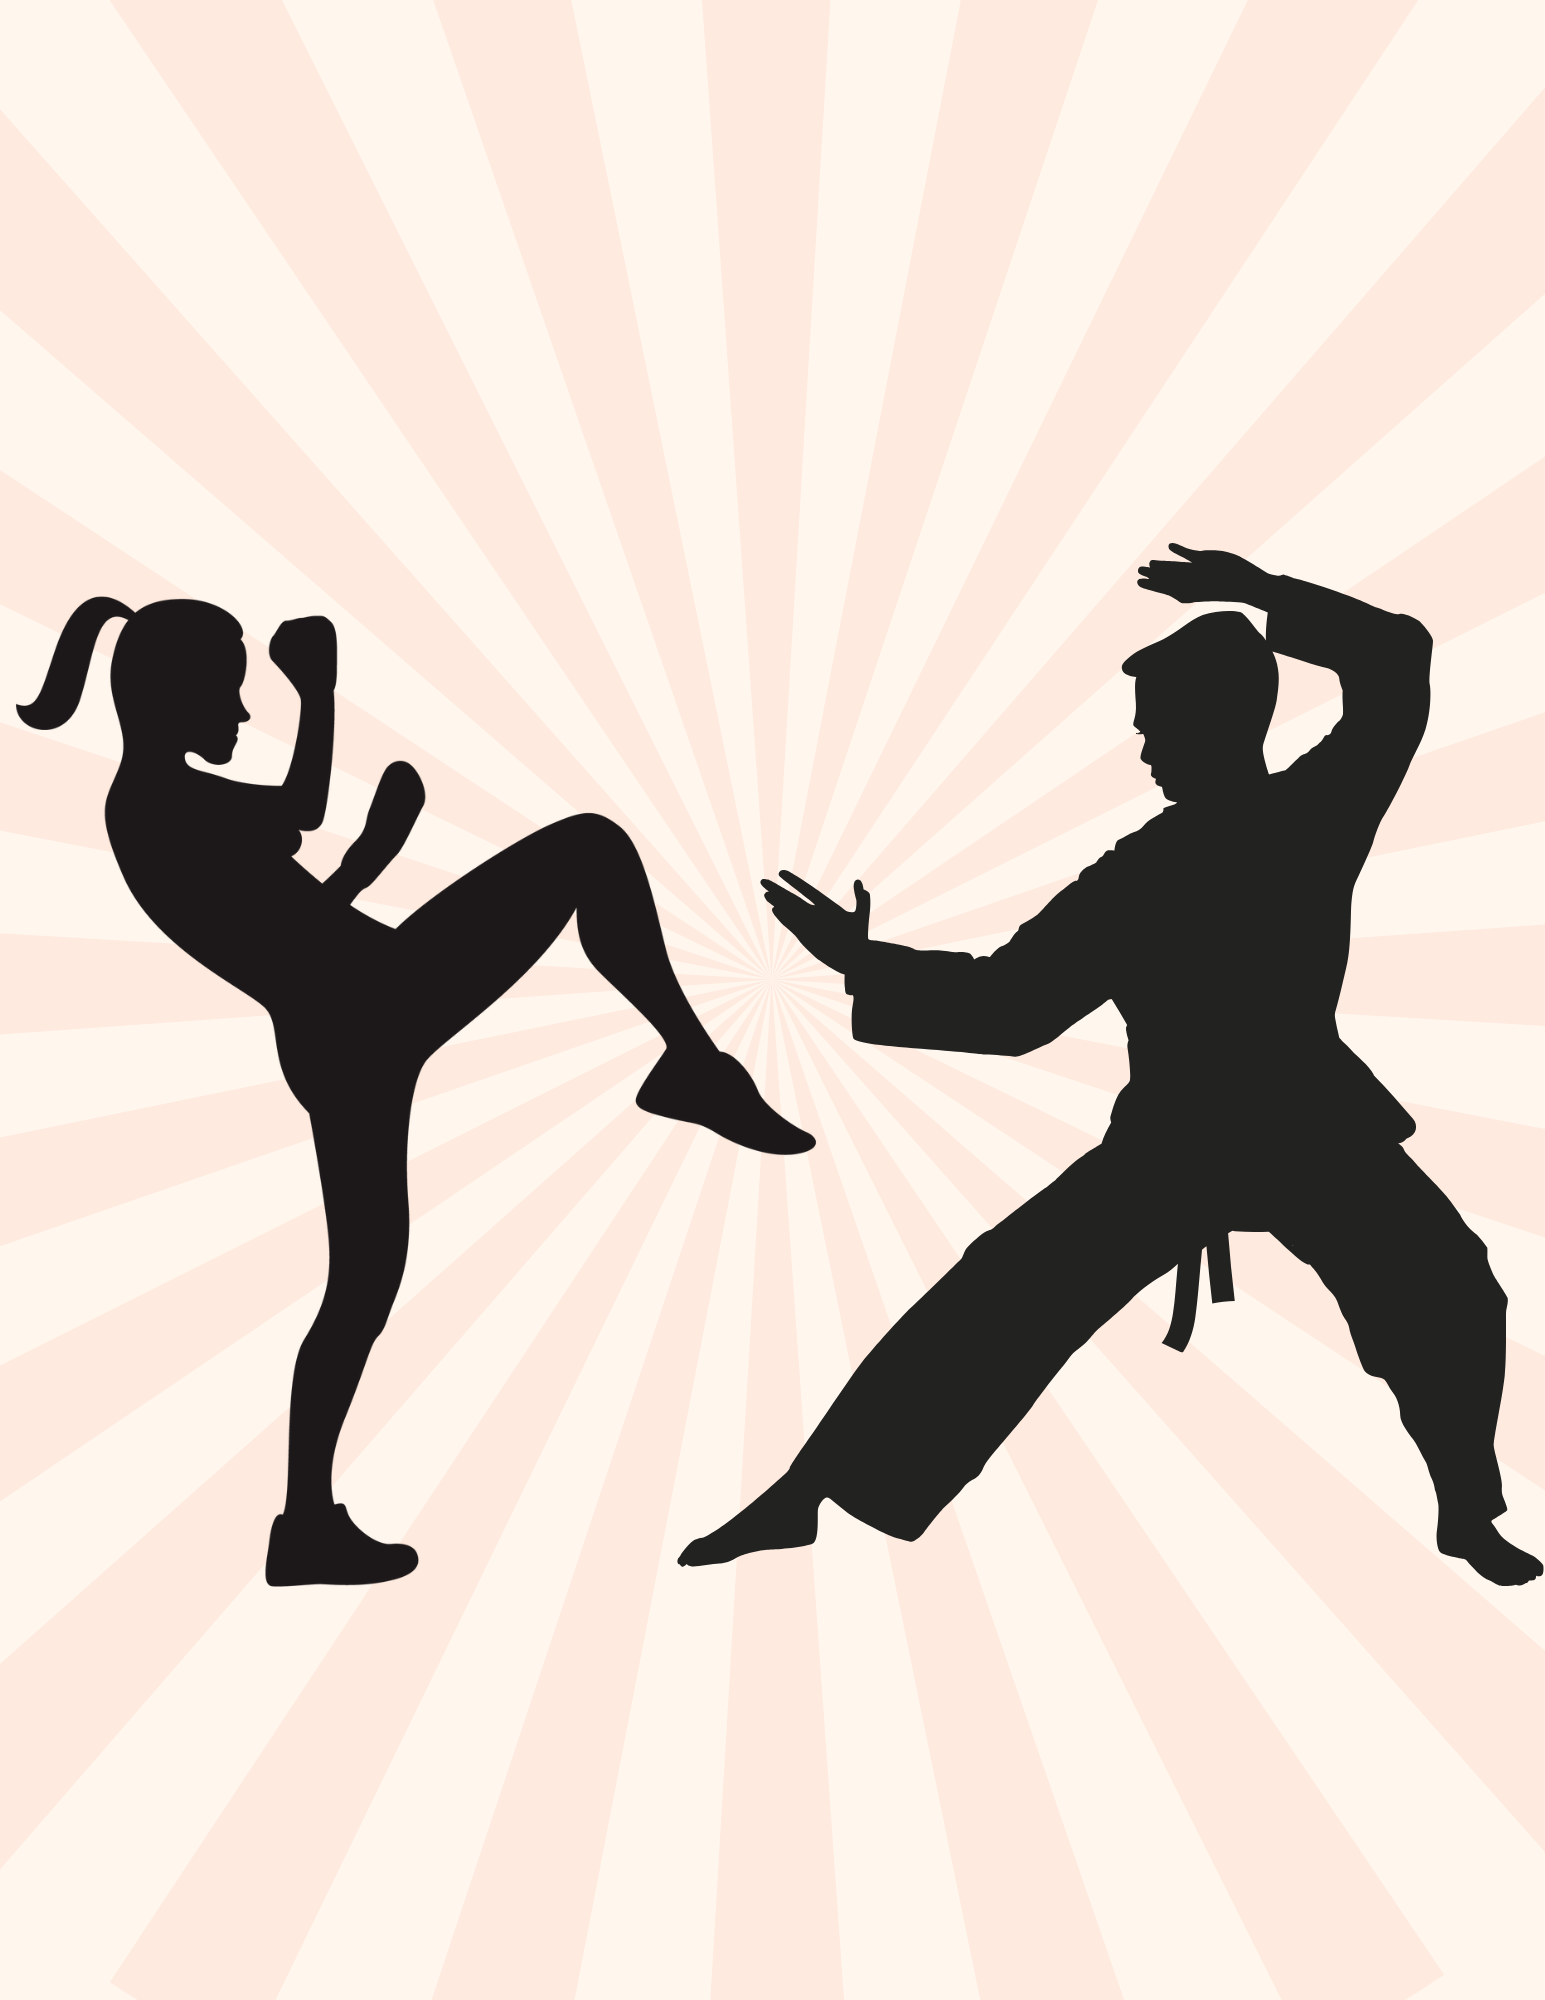 Silhouette of two people in fighting poses, on striped background